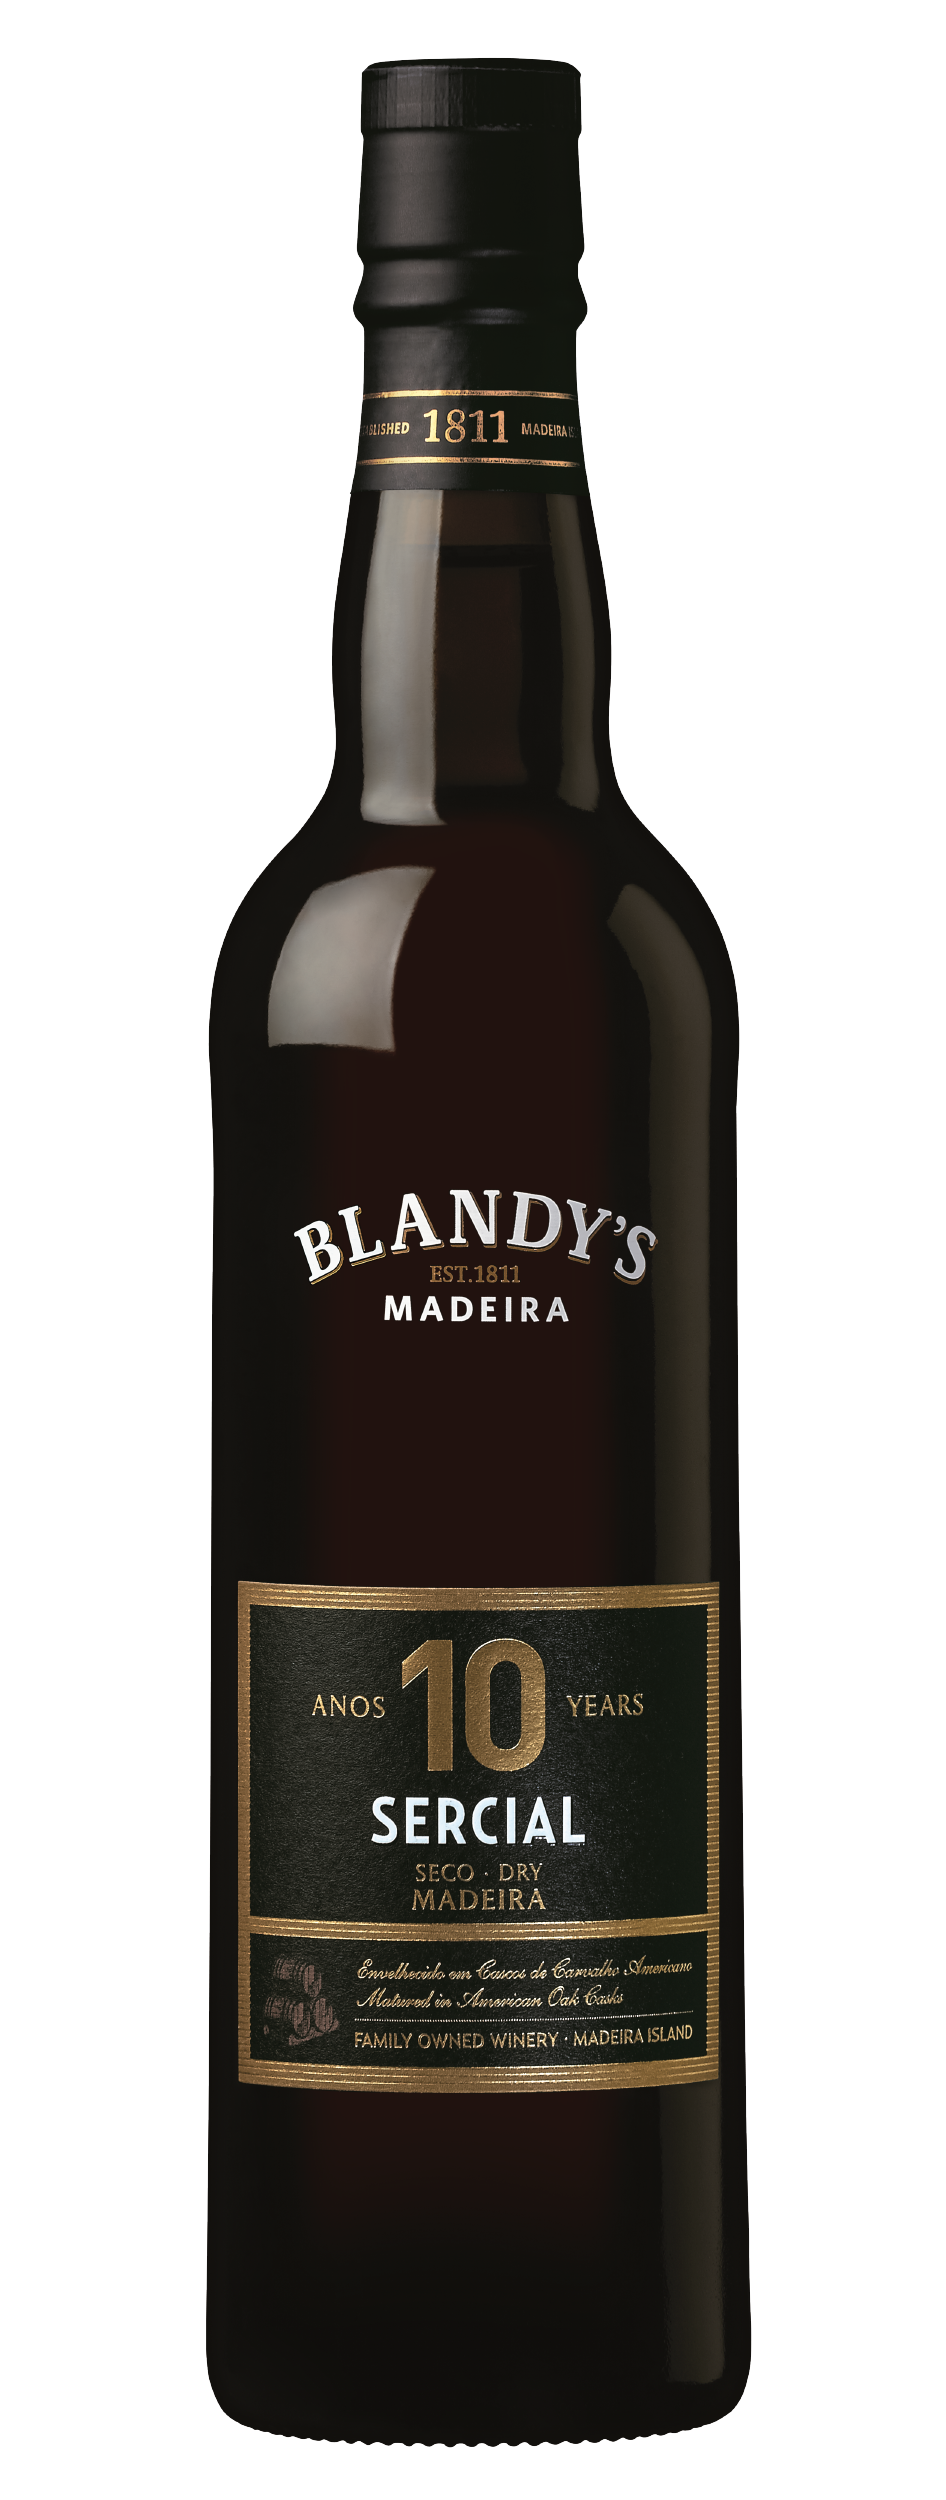 Product Image for BLANDY'S SERCIAL 10 YEAR OLD